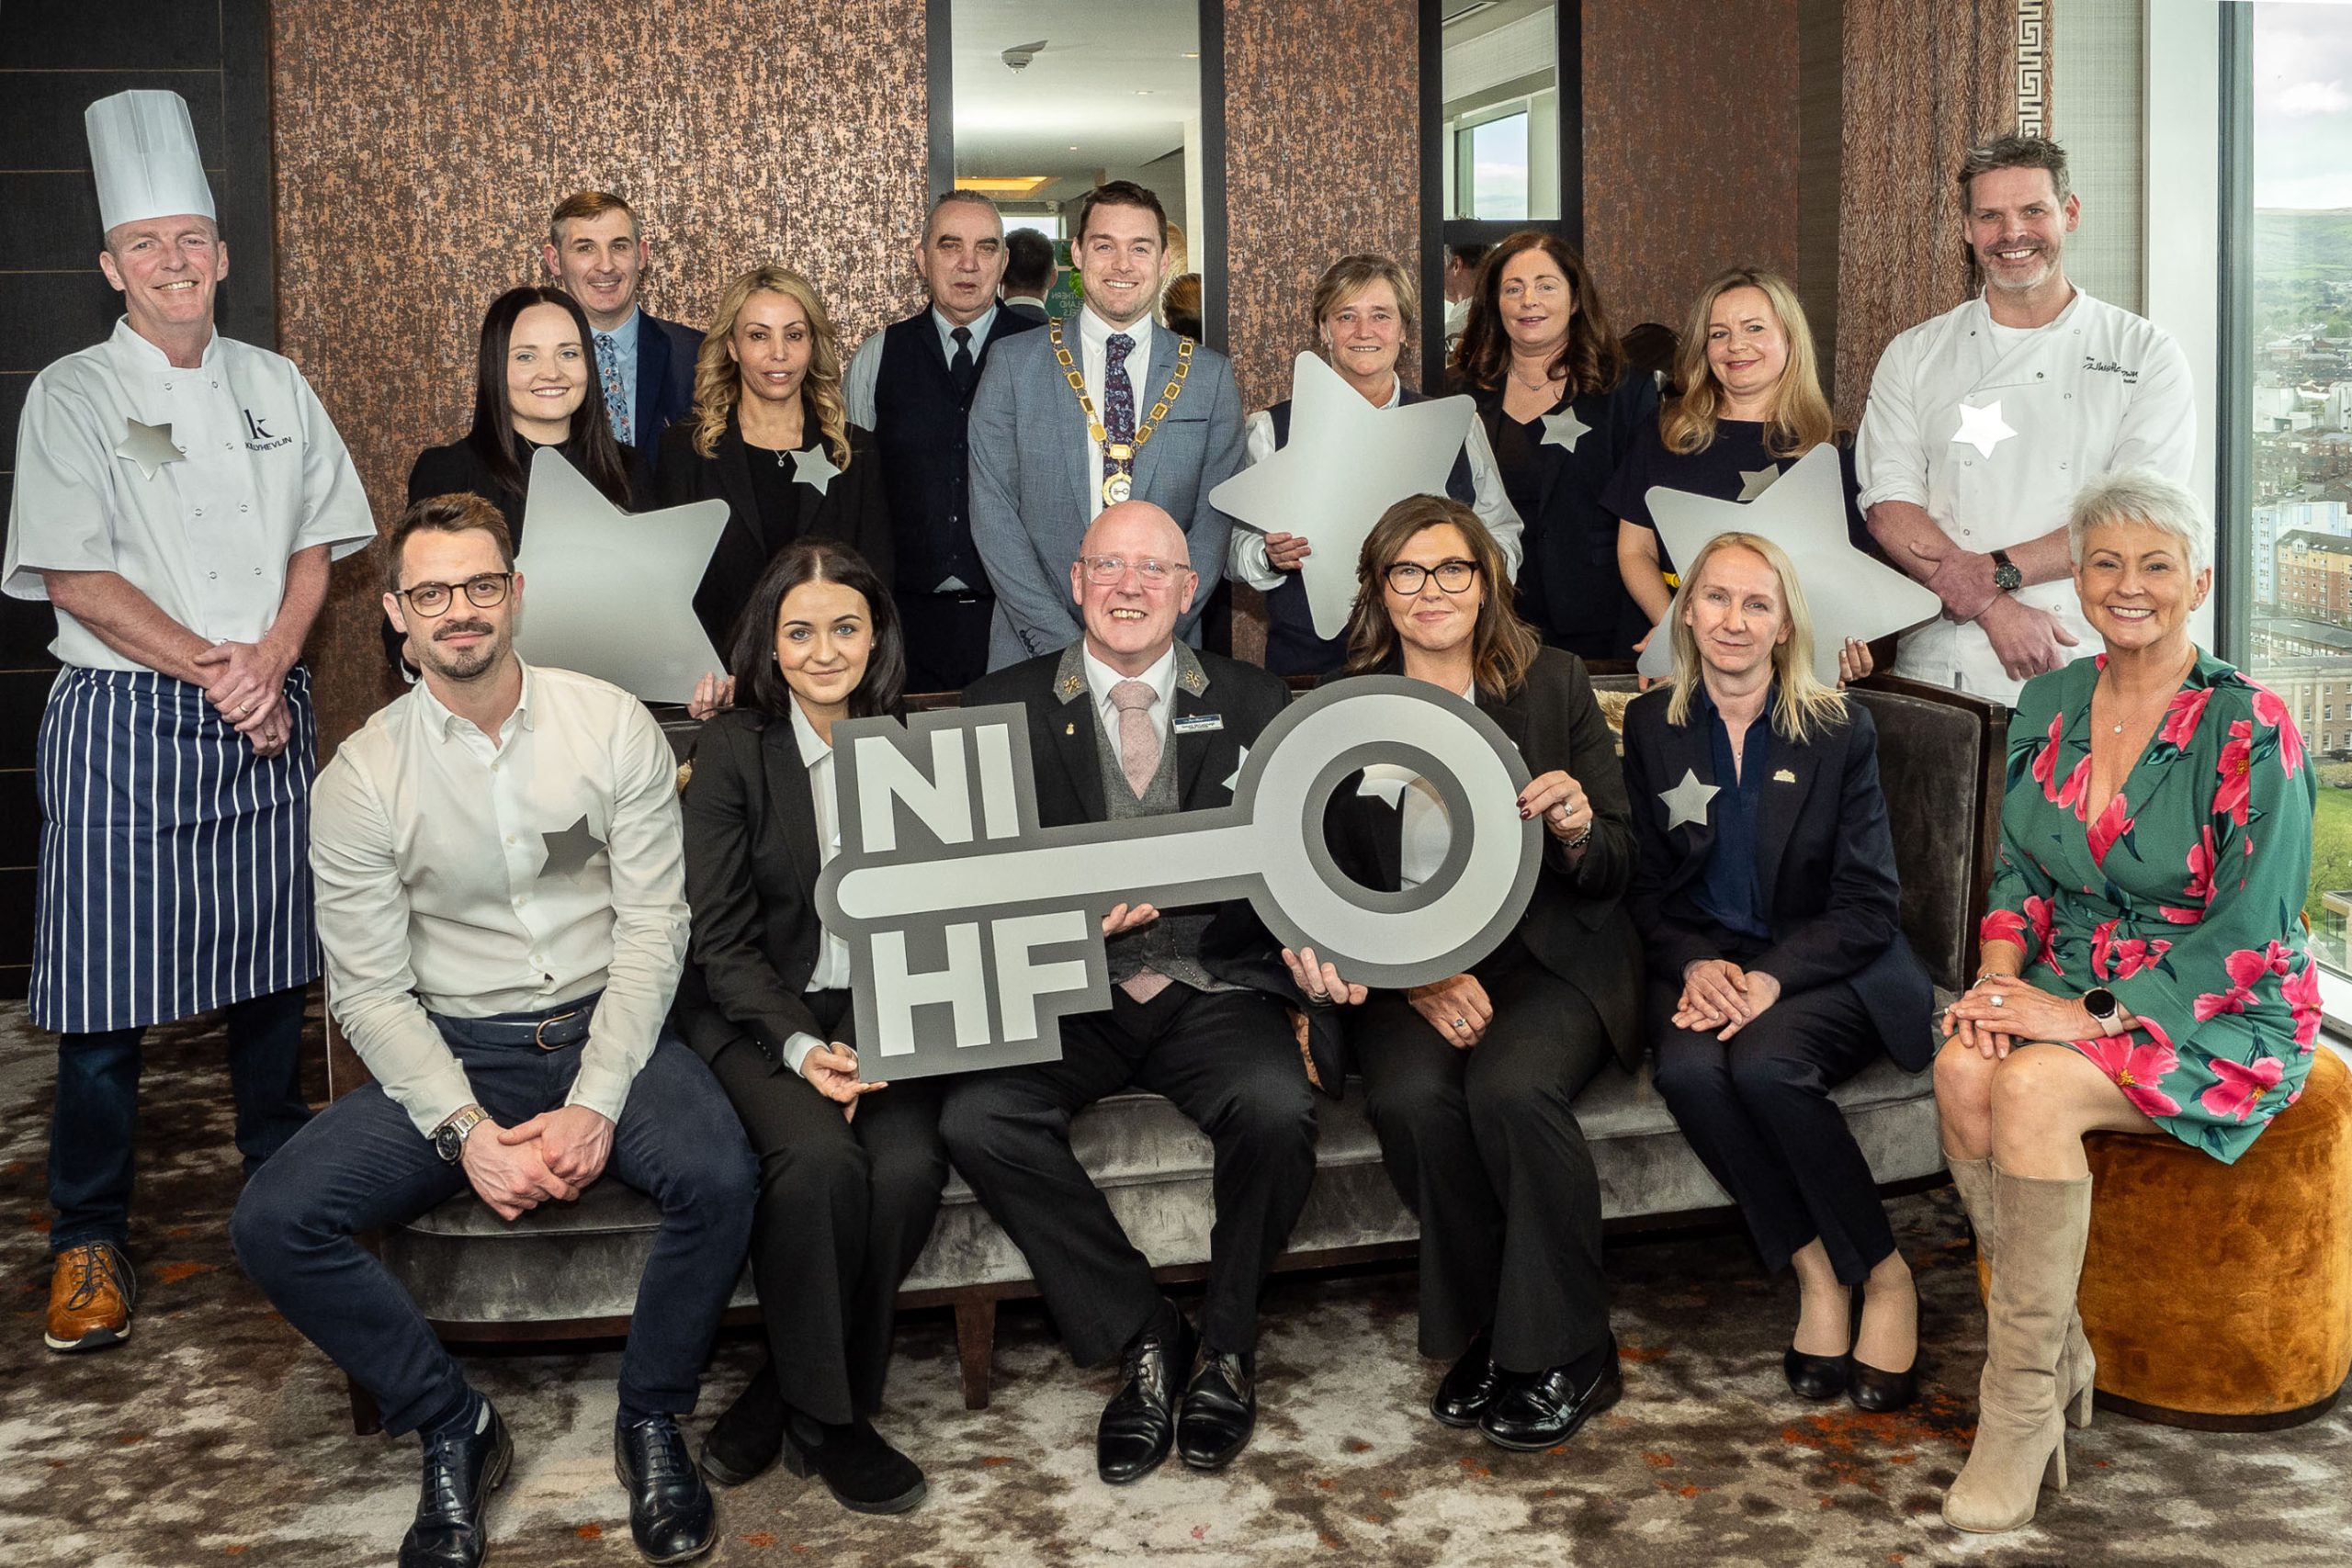 NIHF honours Hotel Heroes as it marks 25th anniversary